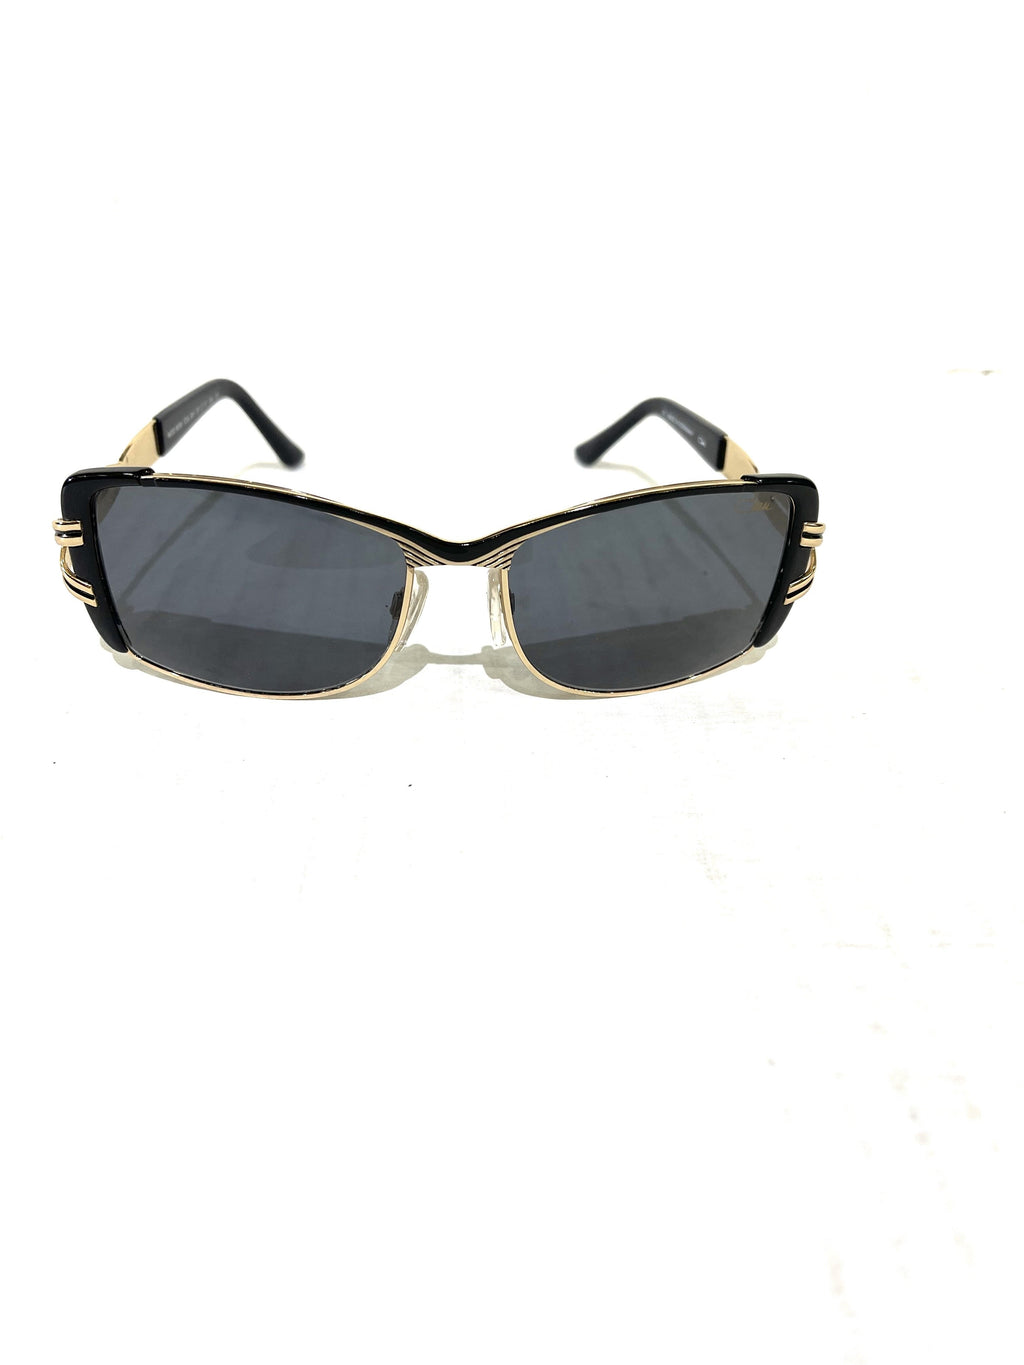 Cazal  Black and Gold Sunglasses FRONT 1 of 3